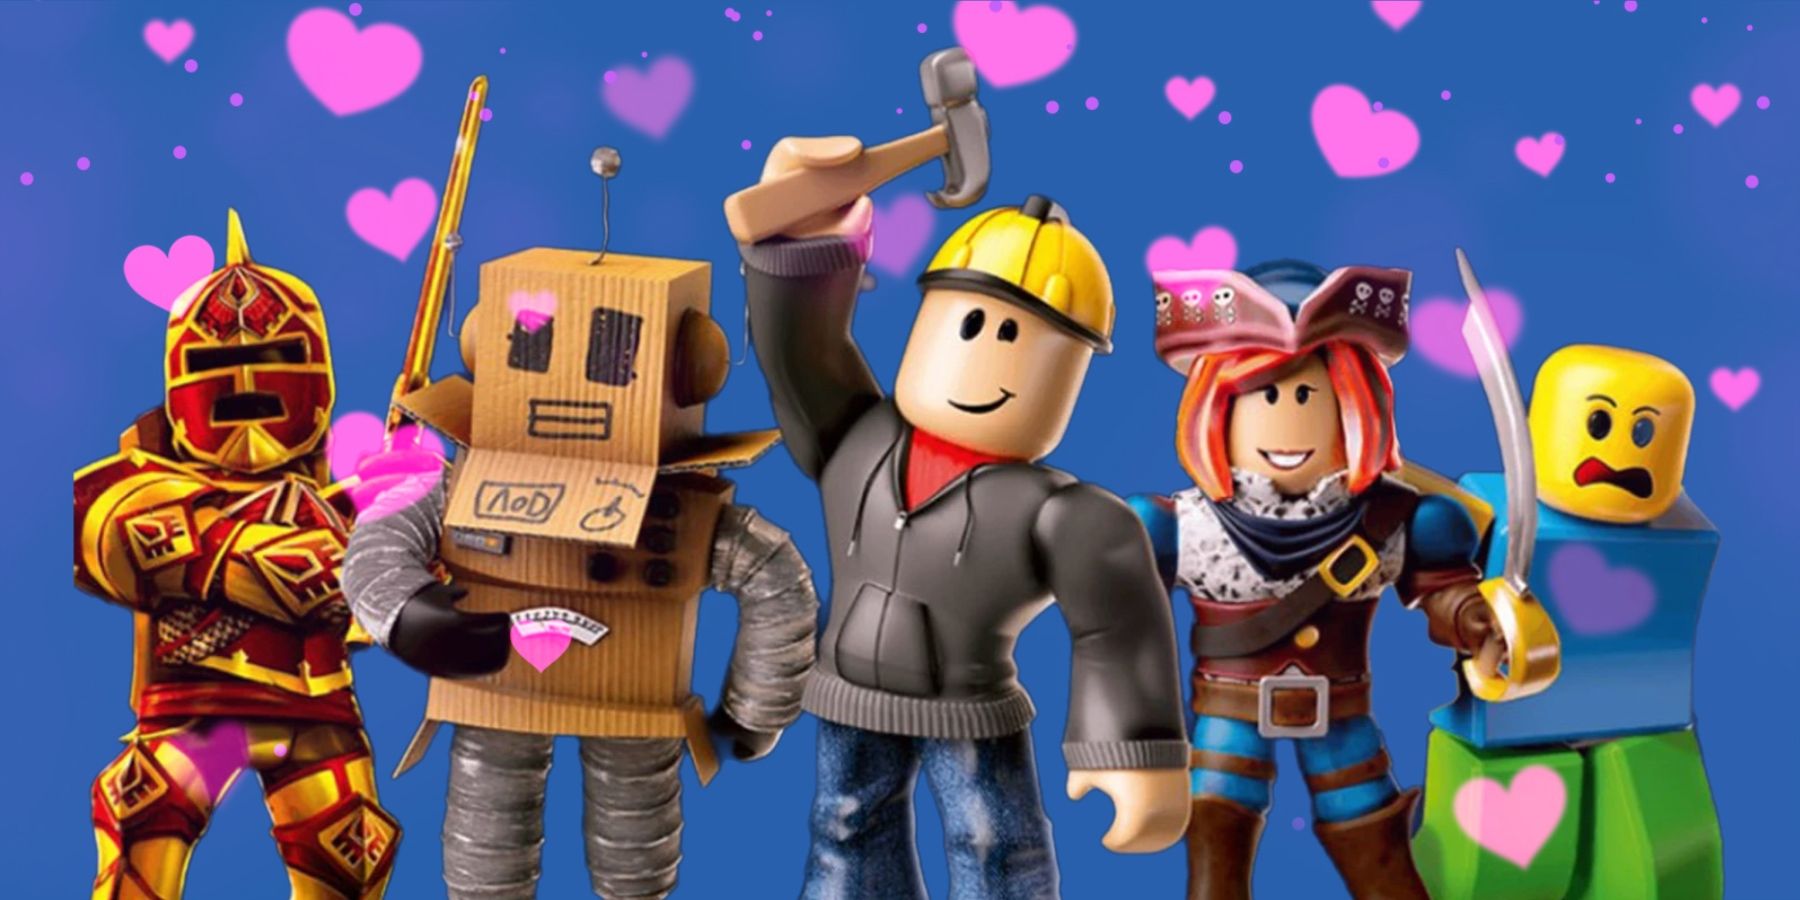 Roblox Could One Day Function as an Online Dating App